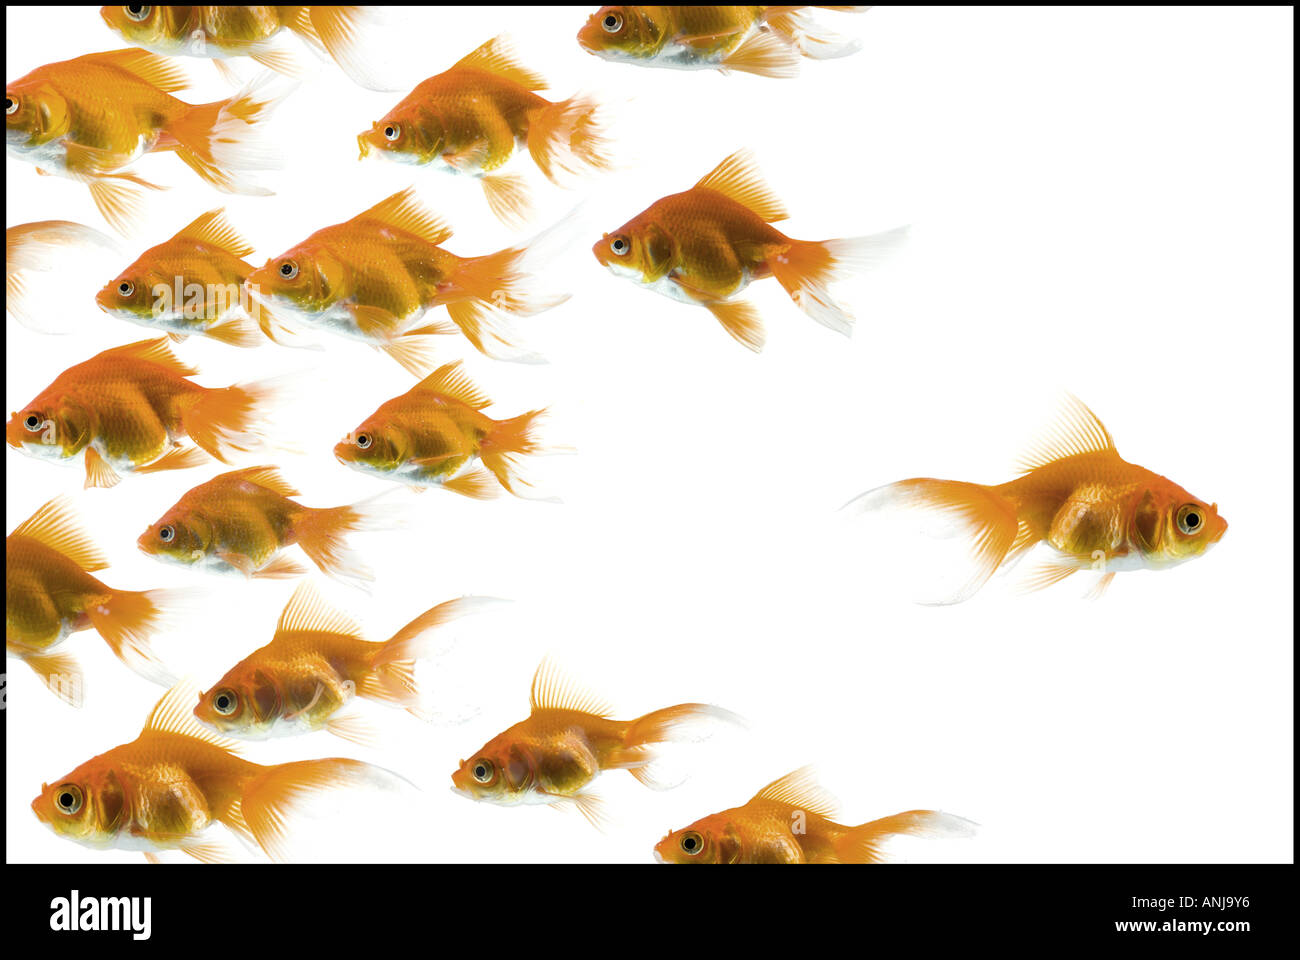 Close up of a school of goldfish Stock Photo